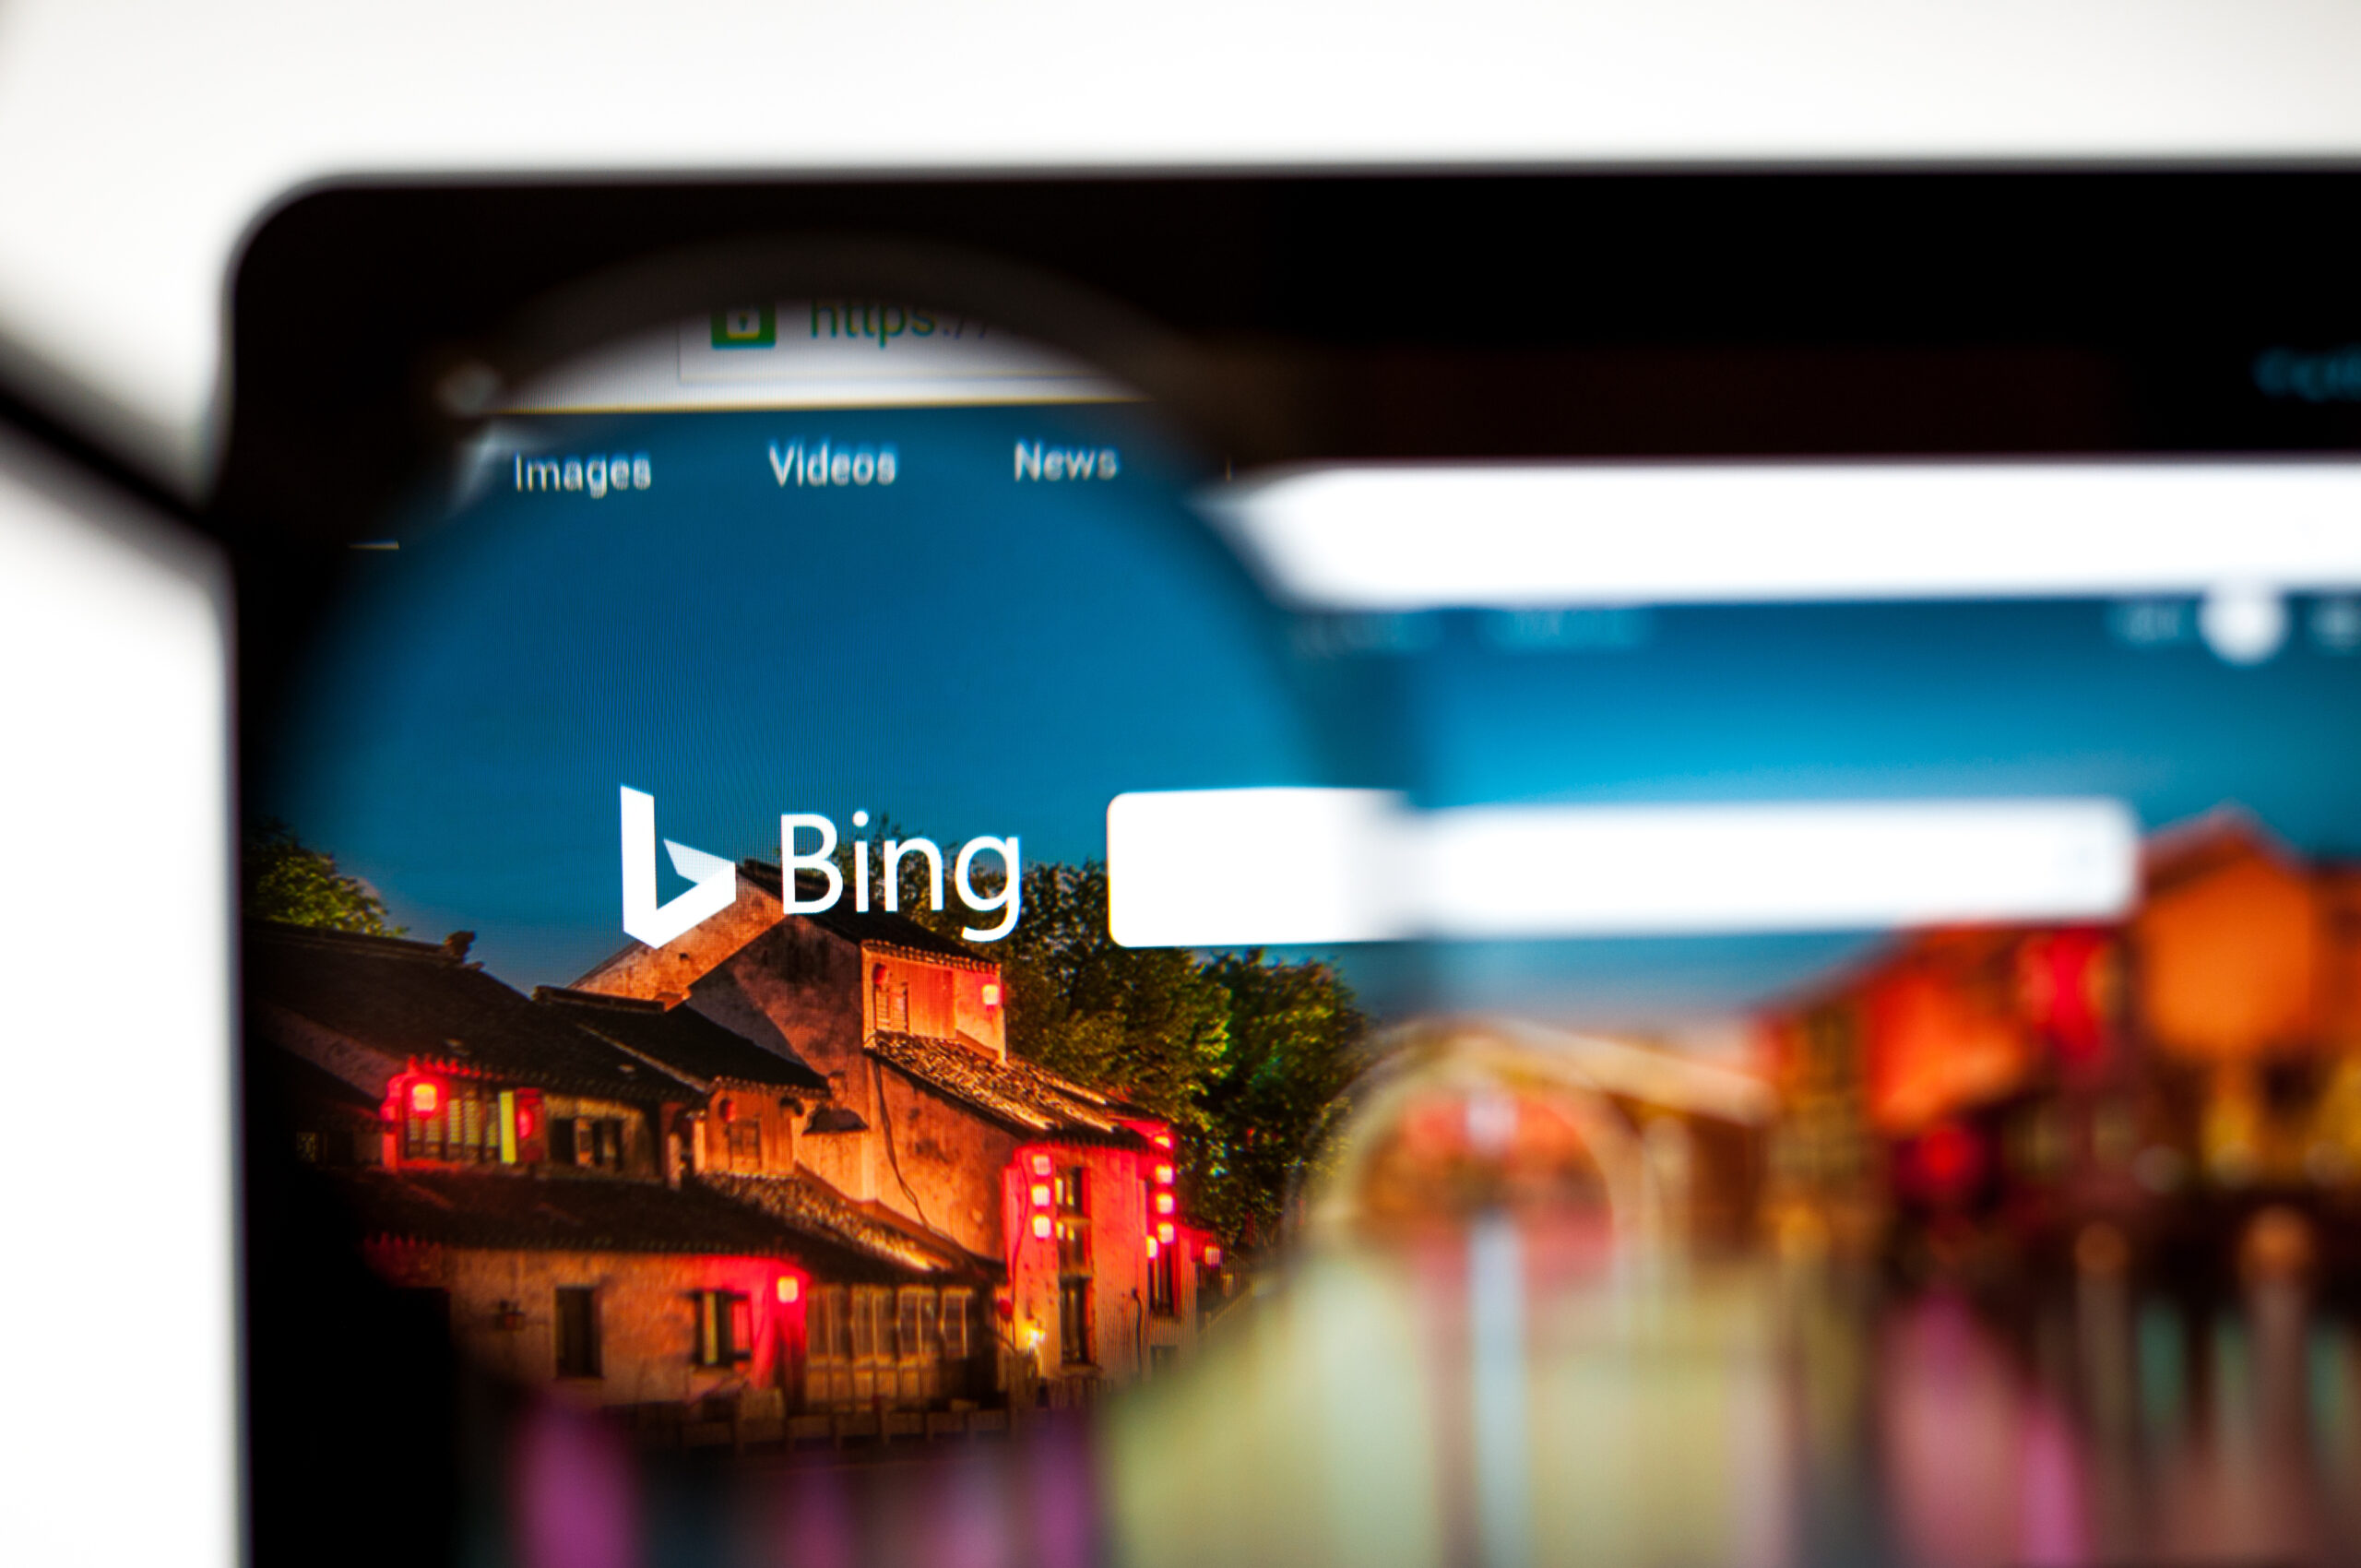 Magnifying glass over the Microsoft Bing logo on a laptop